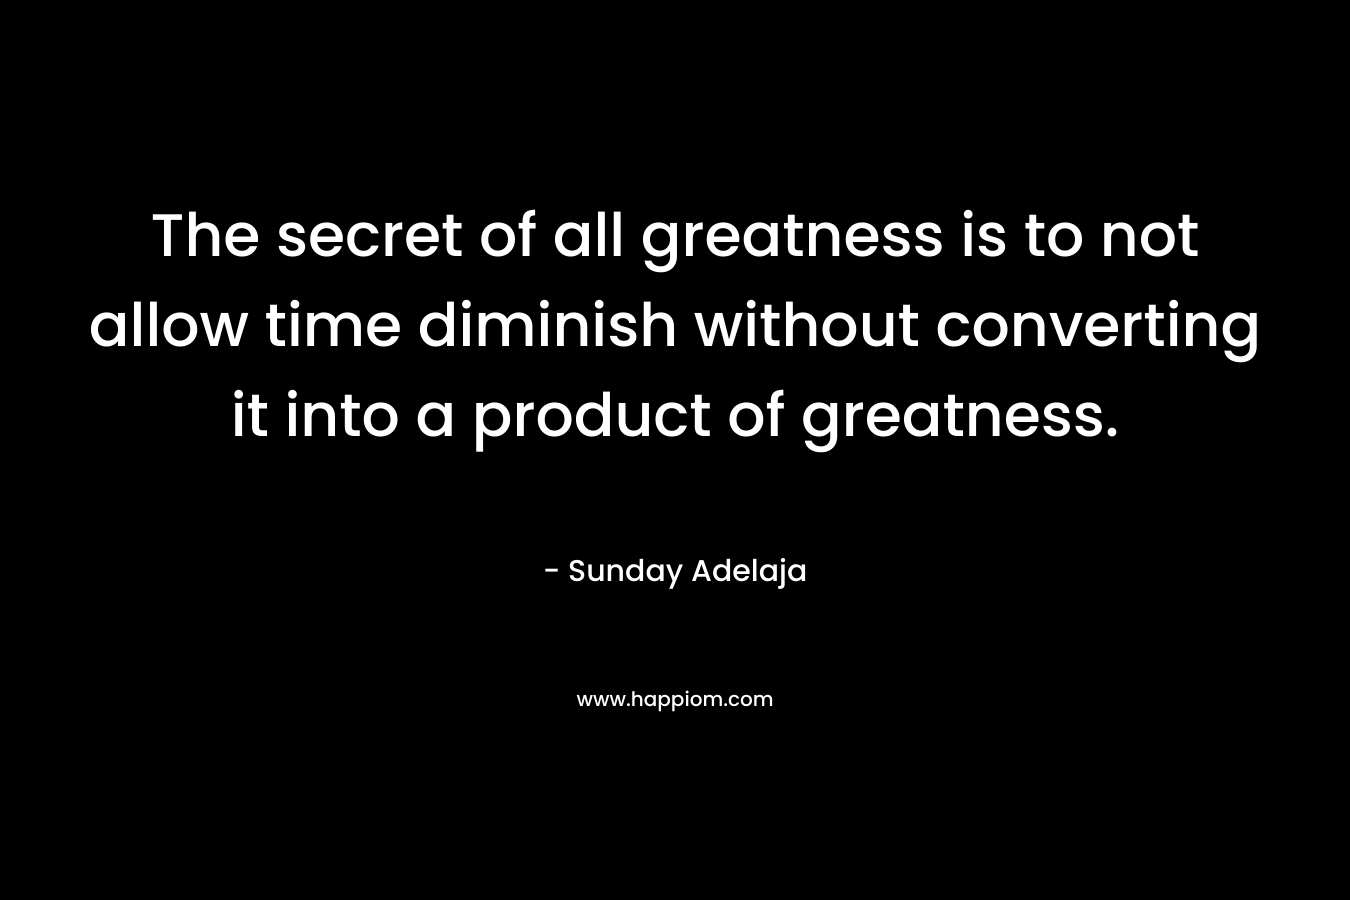 The secret of all greatness is to not allow time diminish without converting it into a product of greatness. – Sunday Adelaja